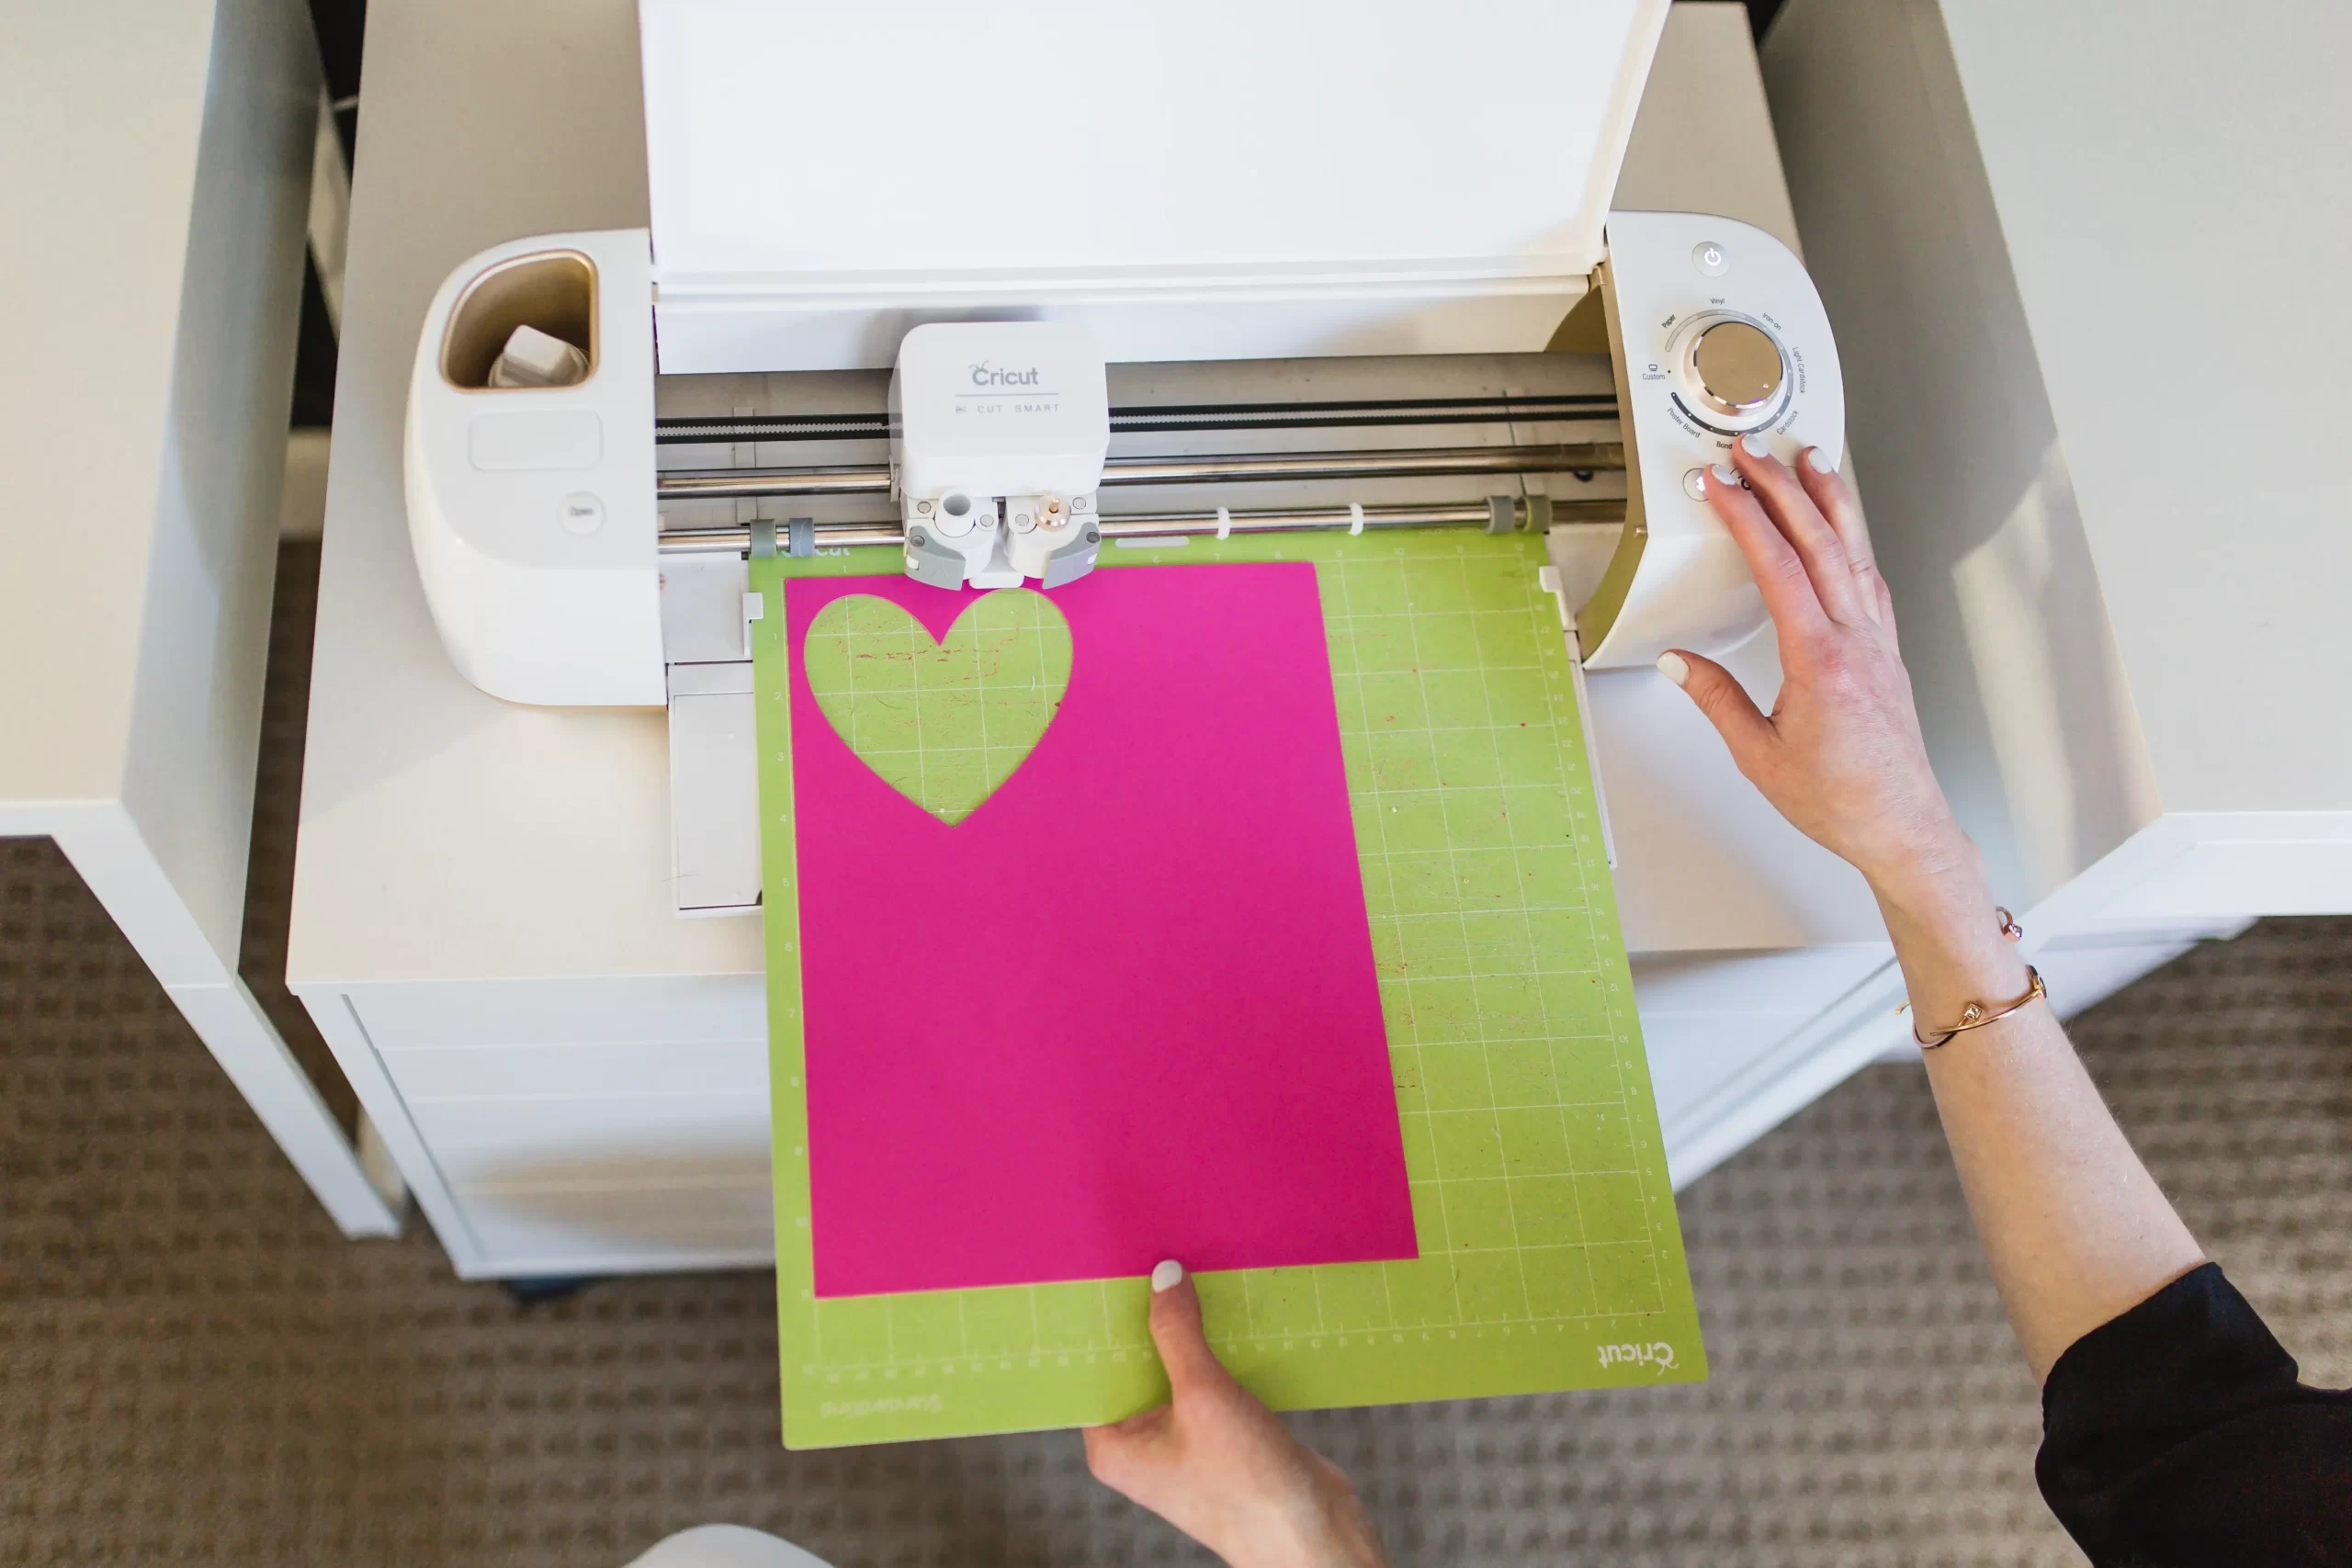 5 Innovative Things You Didn’t Know You Could Do with a Cricut Machine